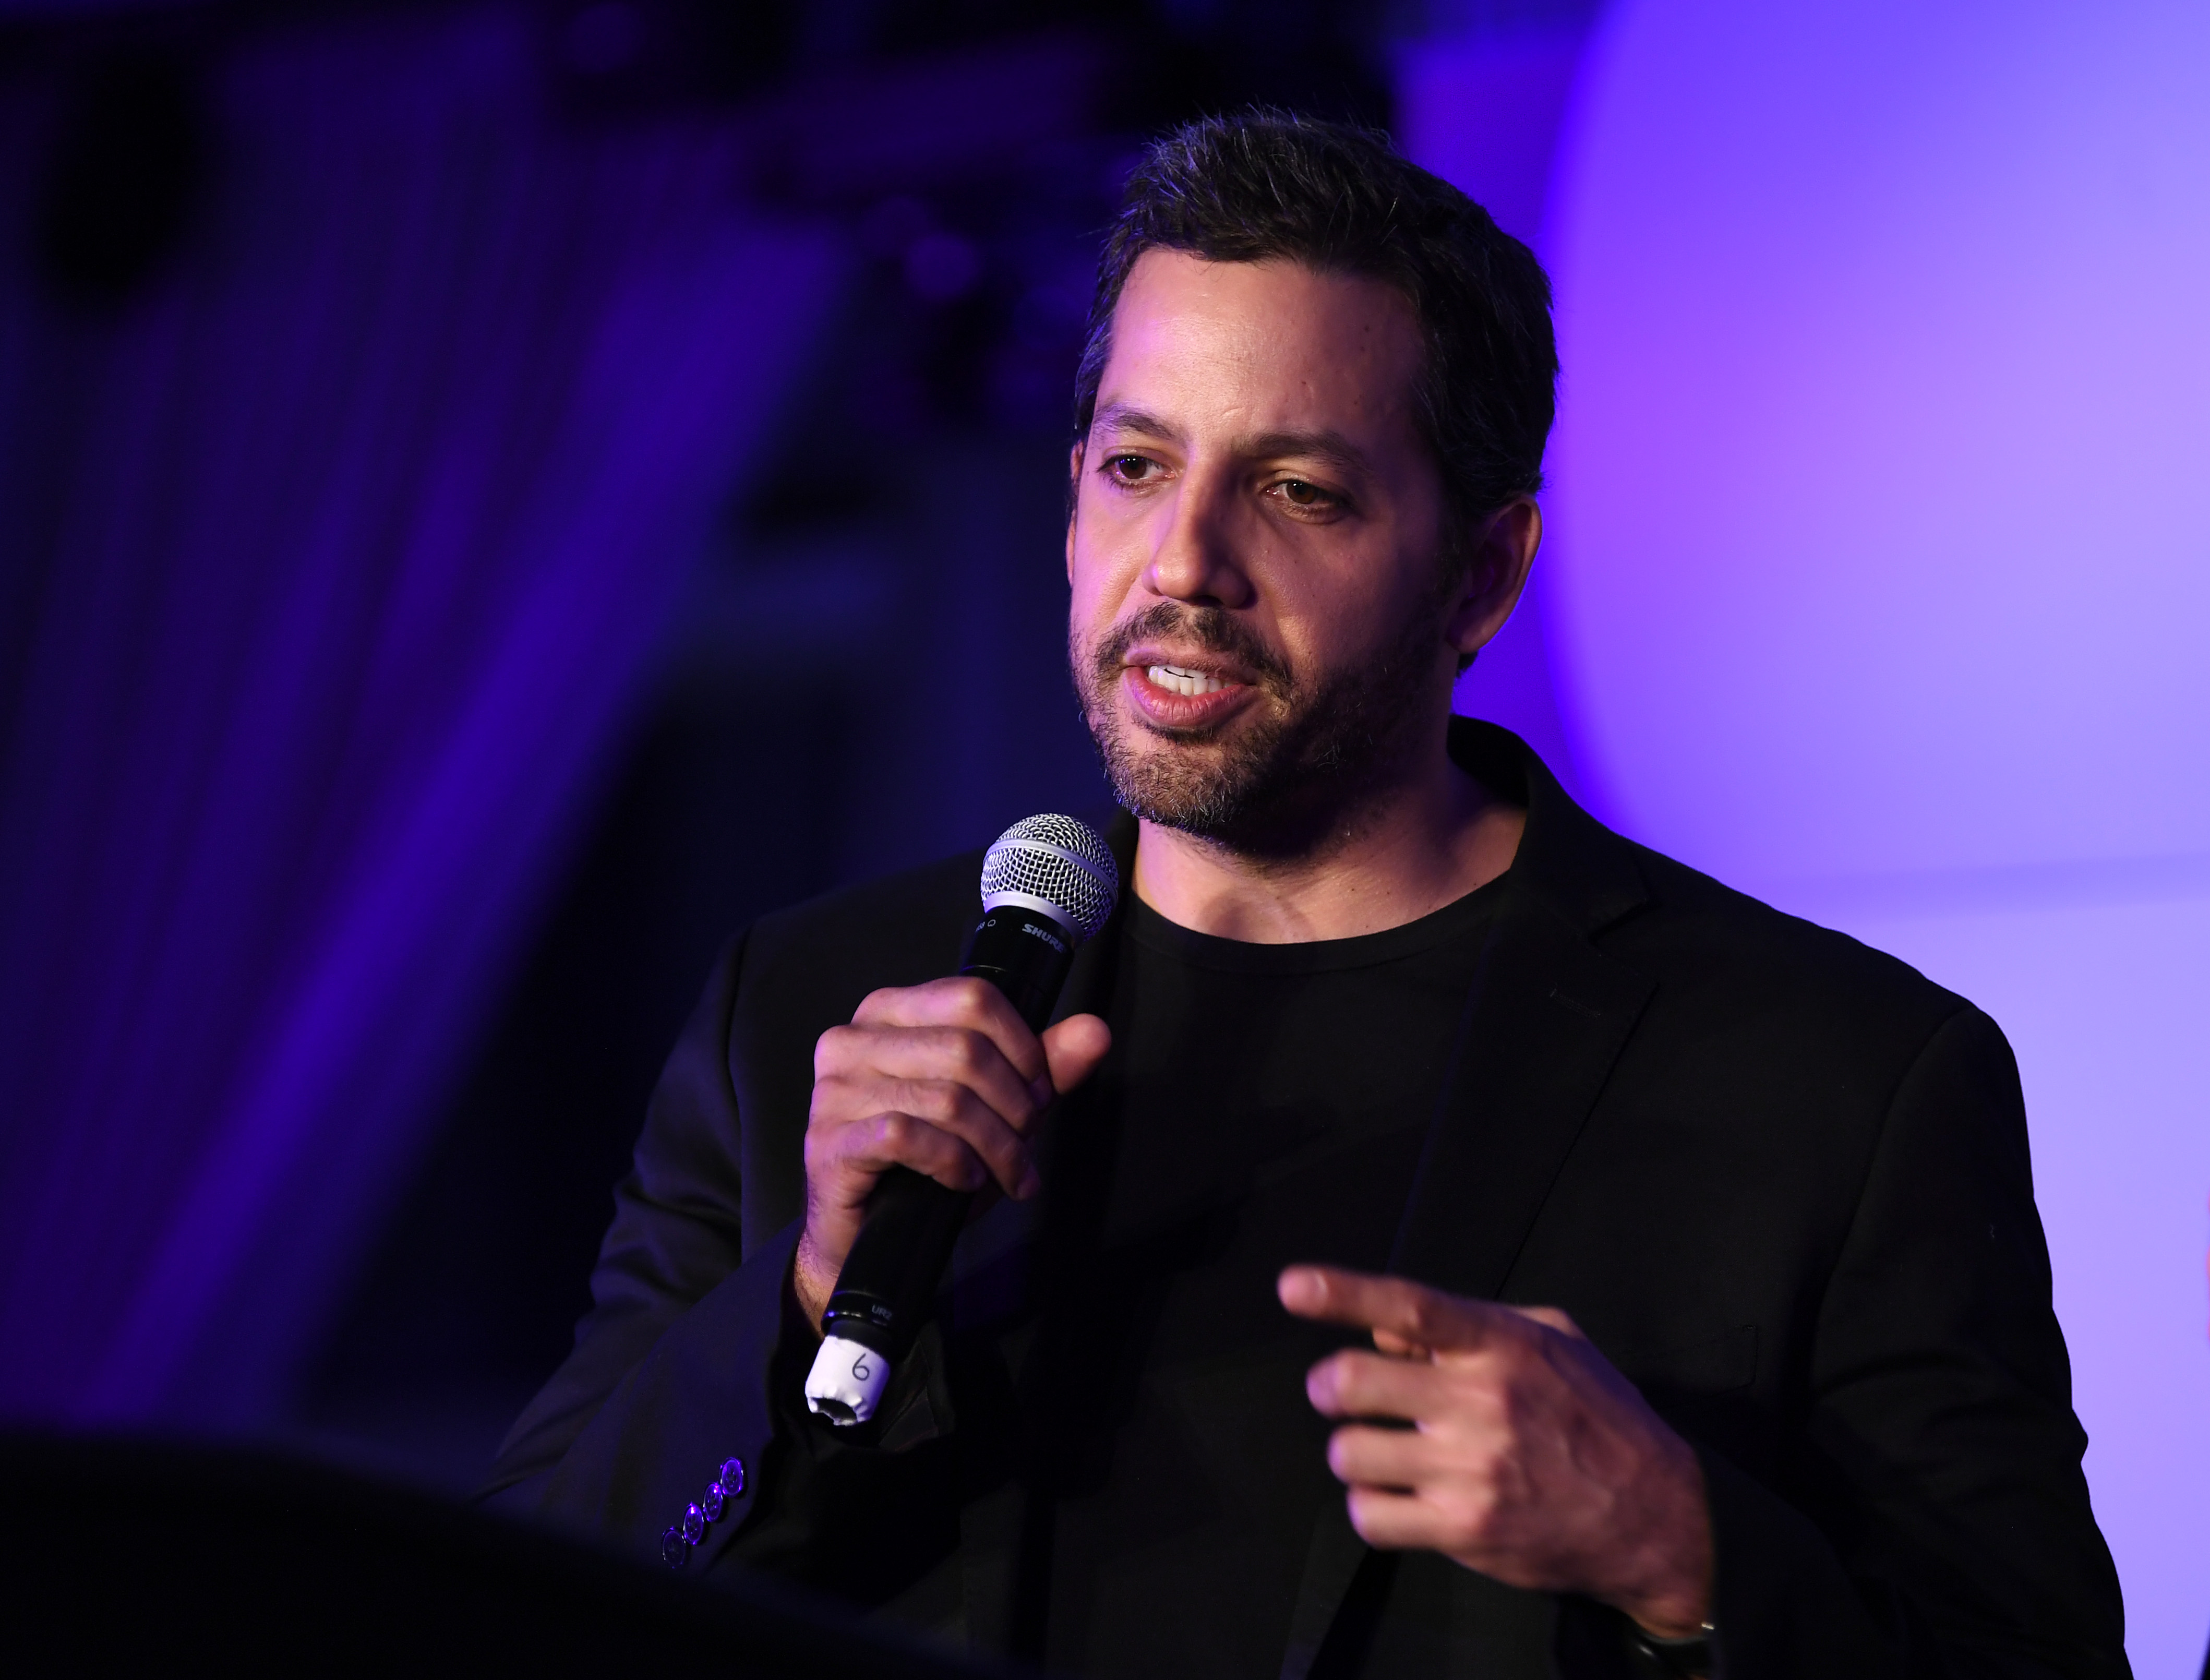 JERSEY CITY, NJ - MAY 05: Magician David Blaine speaks during Genius Gala 6.0 at Liberty Science Center on May 5, 2017 in Jersey City, New Jersey. (Photo by Dave Kotinsky/Getty Images for Liberty Science Center) (Dave Kotinsky—Getty Images for Liberty Science Center)